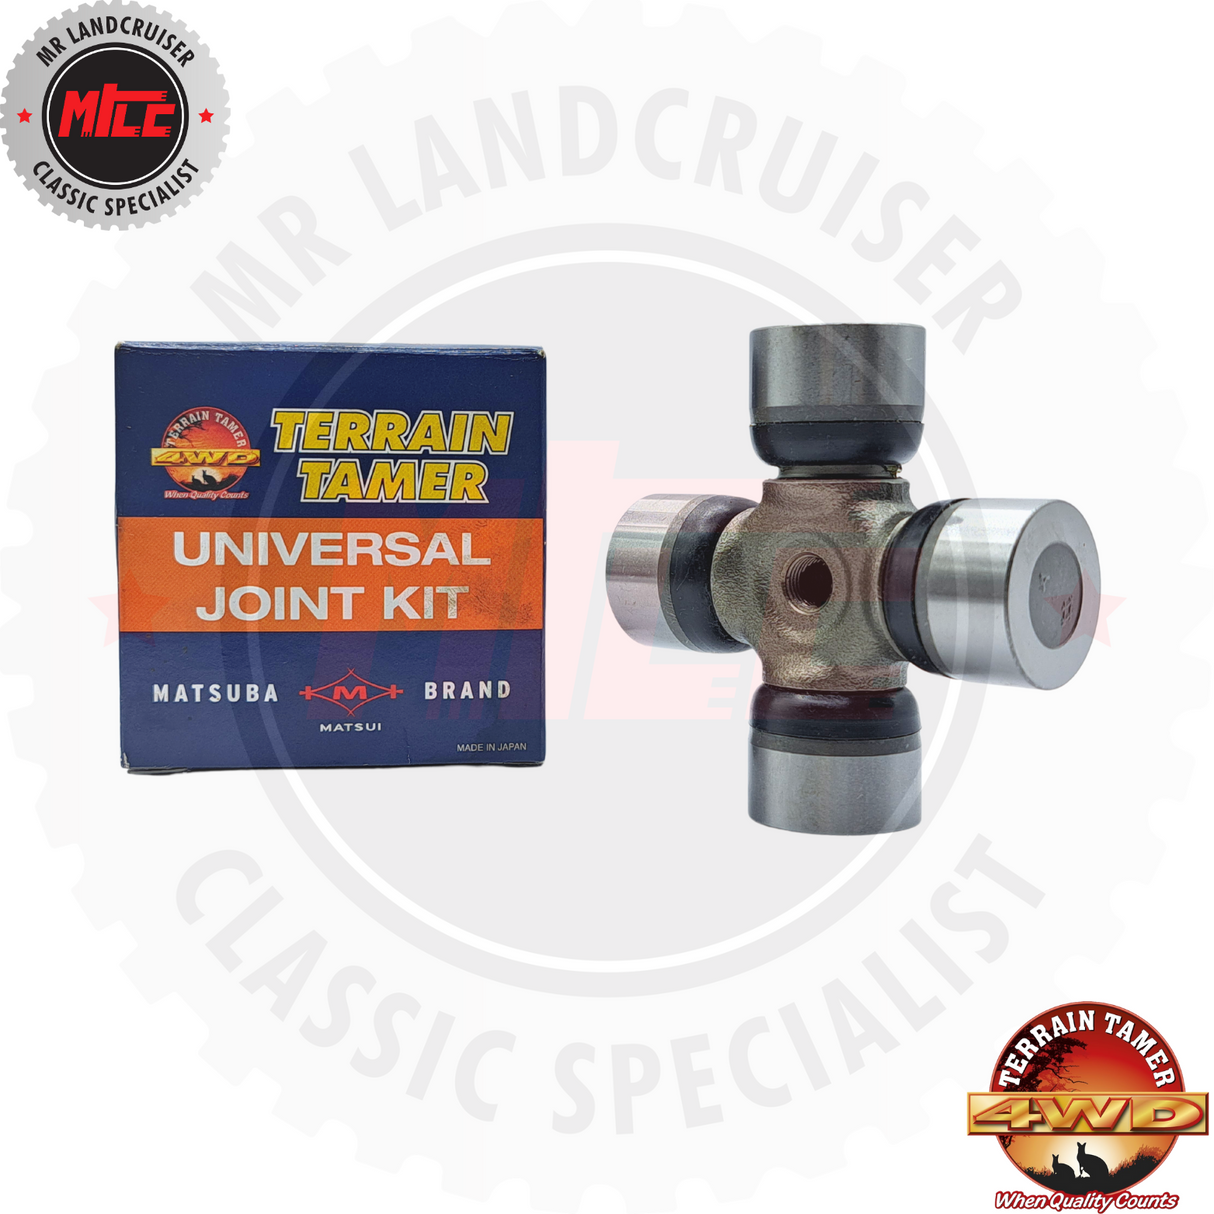 Universal Joint Kit Front & Rear suitable for 40 & 45 series Toyota Landcruiser with packaging